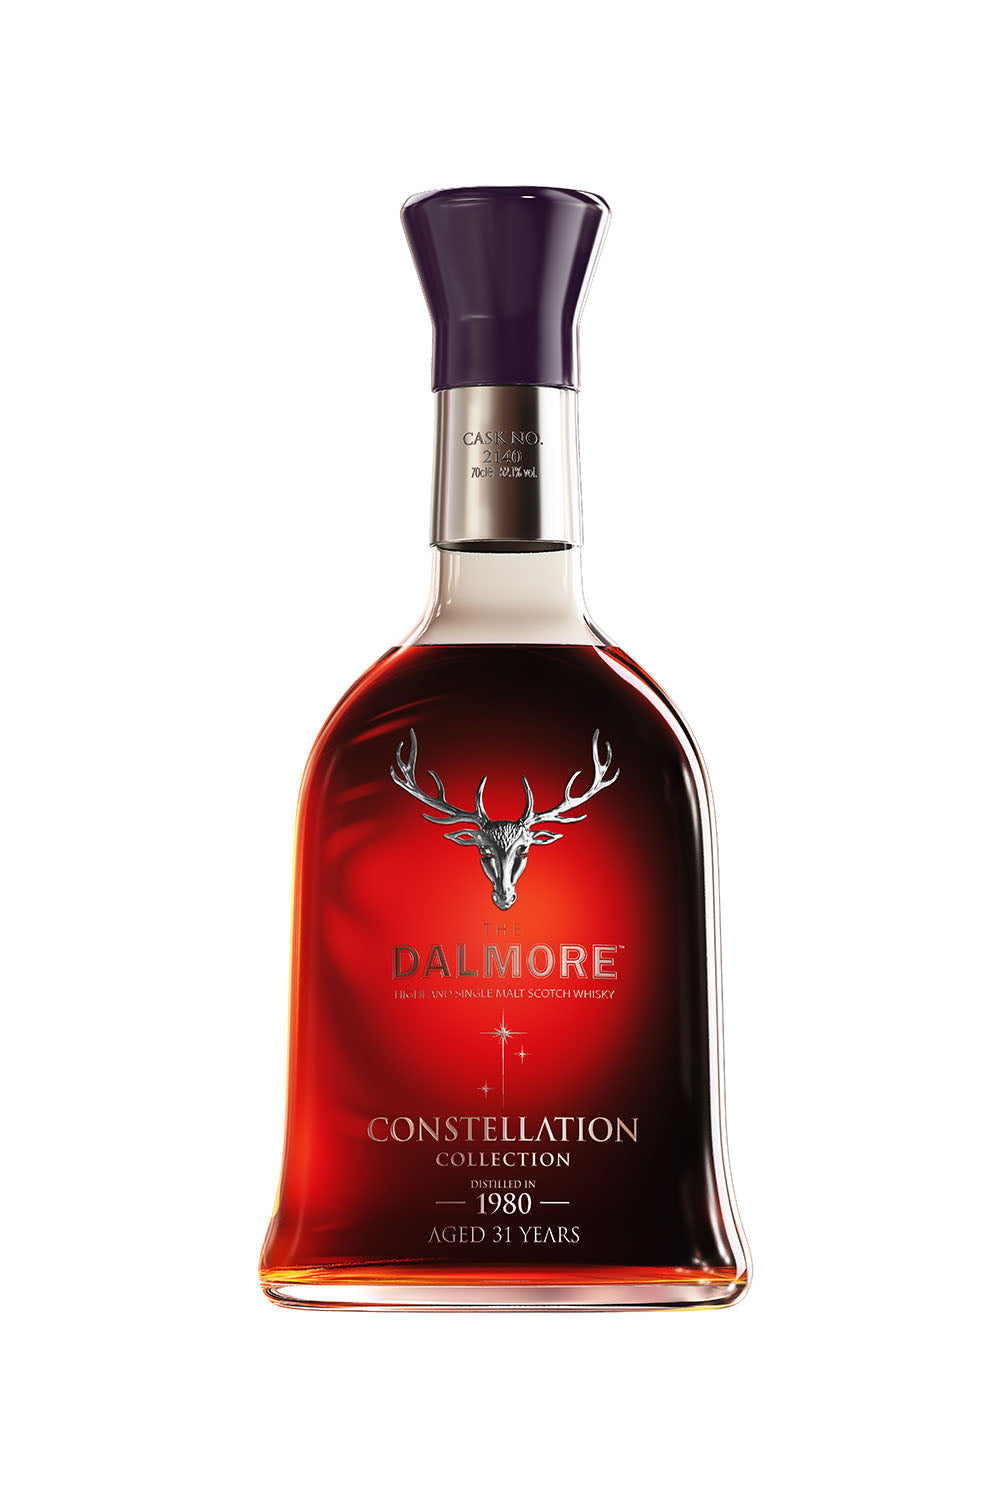 The Dalmore 1980 Constellation - Cask 2140